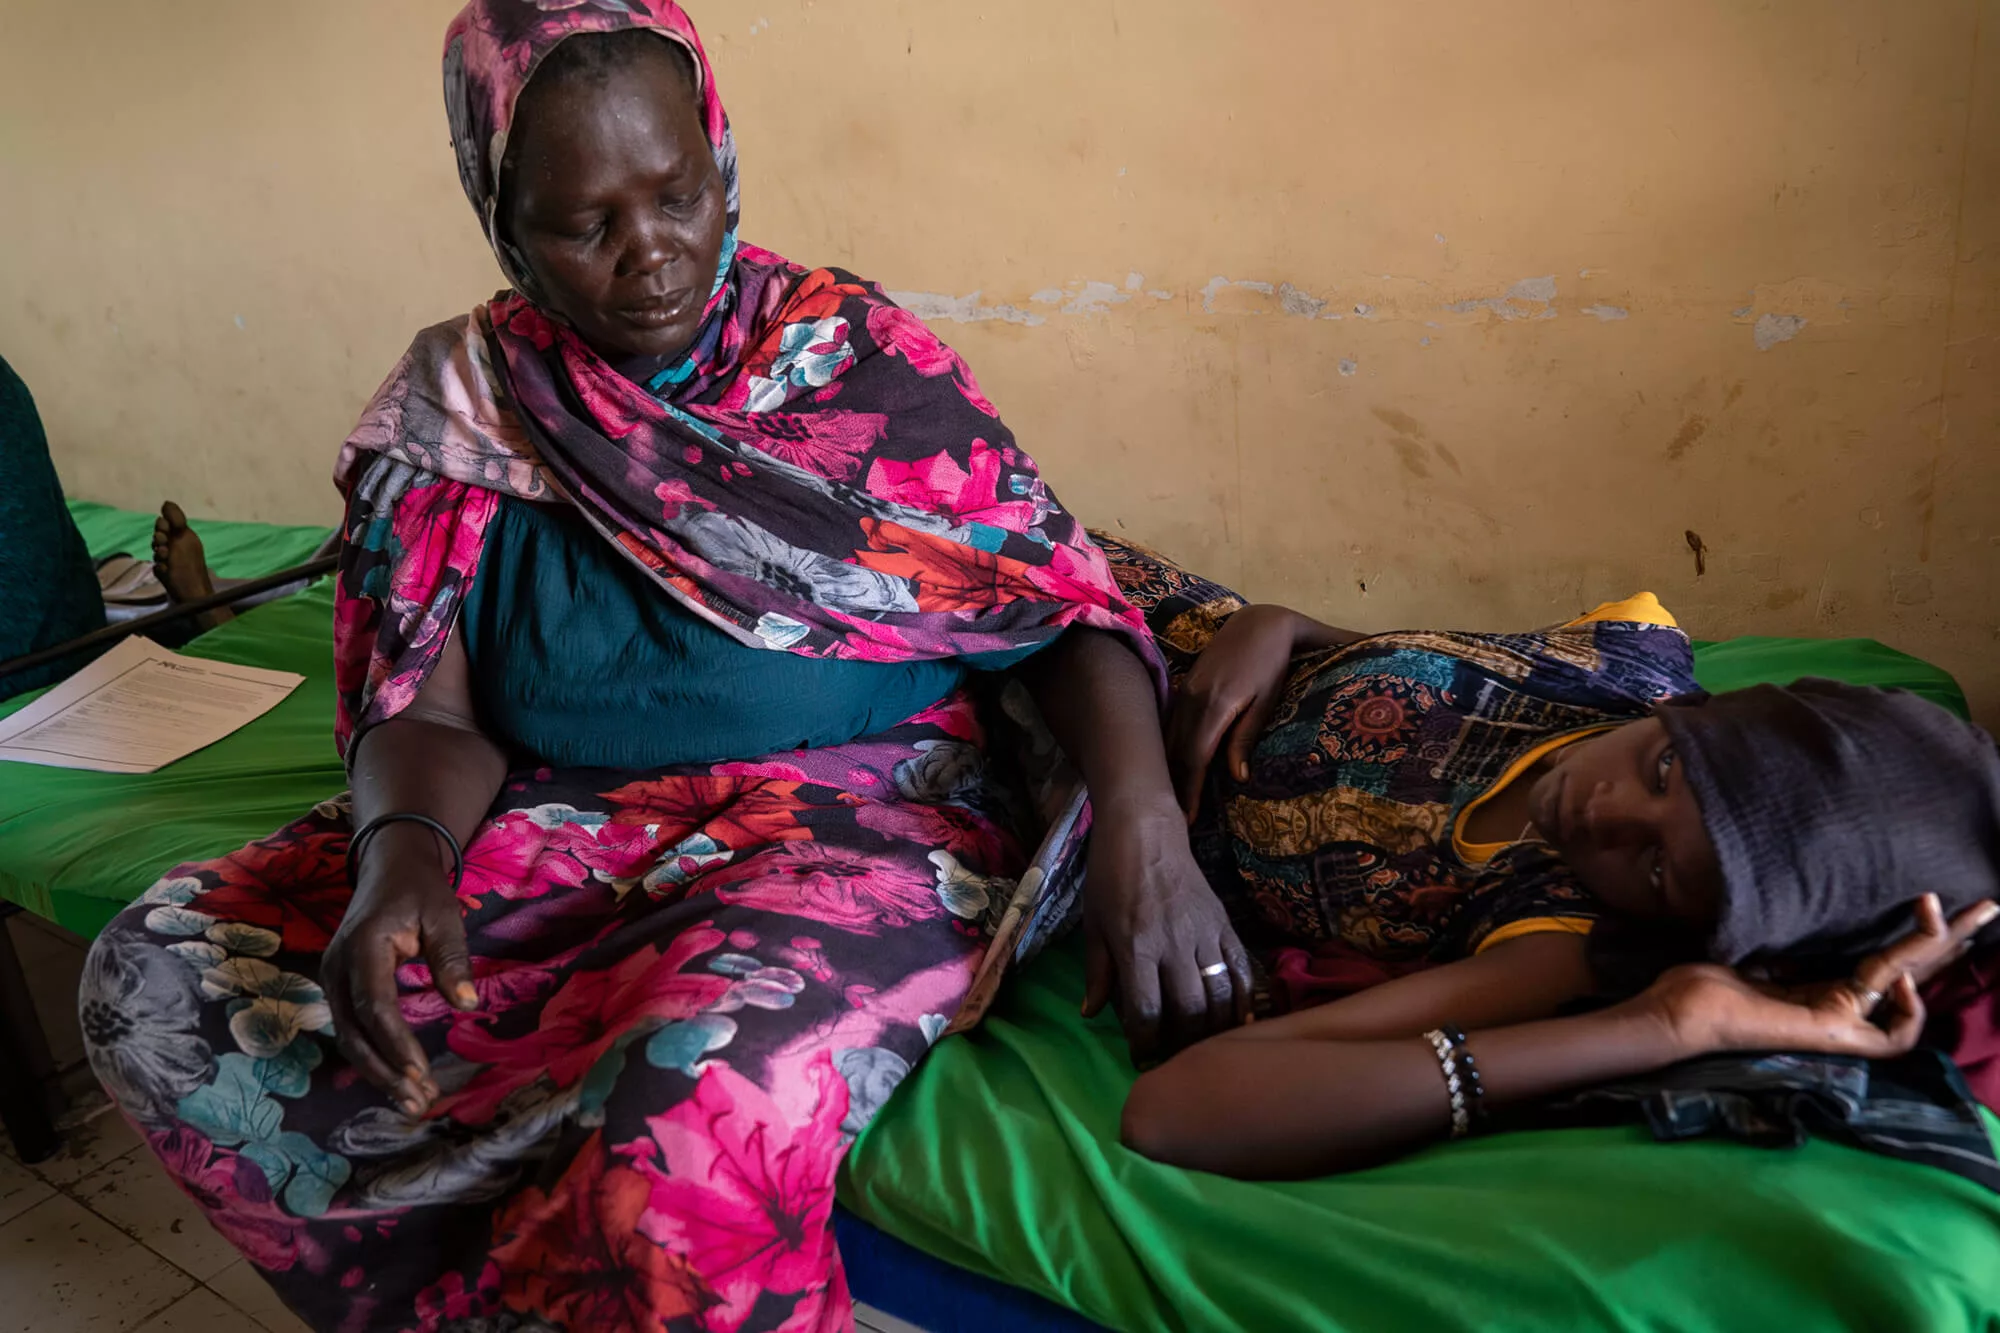 Nyabew Wechiang and her daughter, Sabrina Abdulatif, were patients at our clinic in Renk, South Sudan.